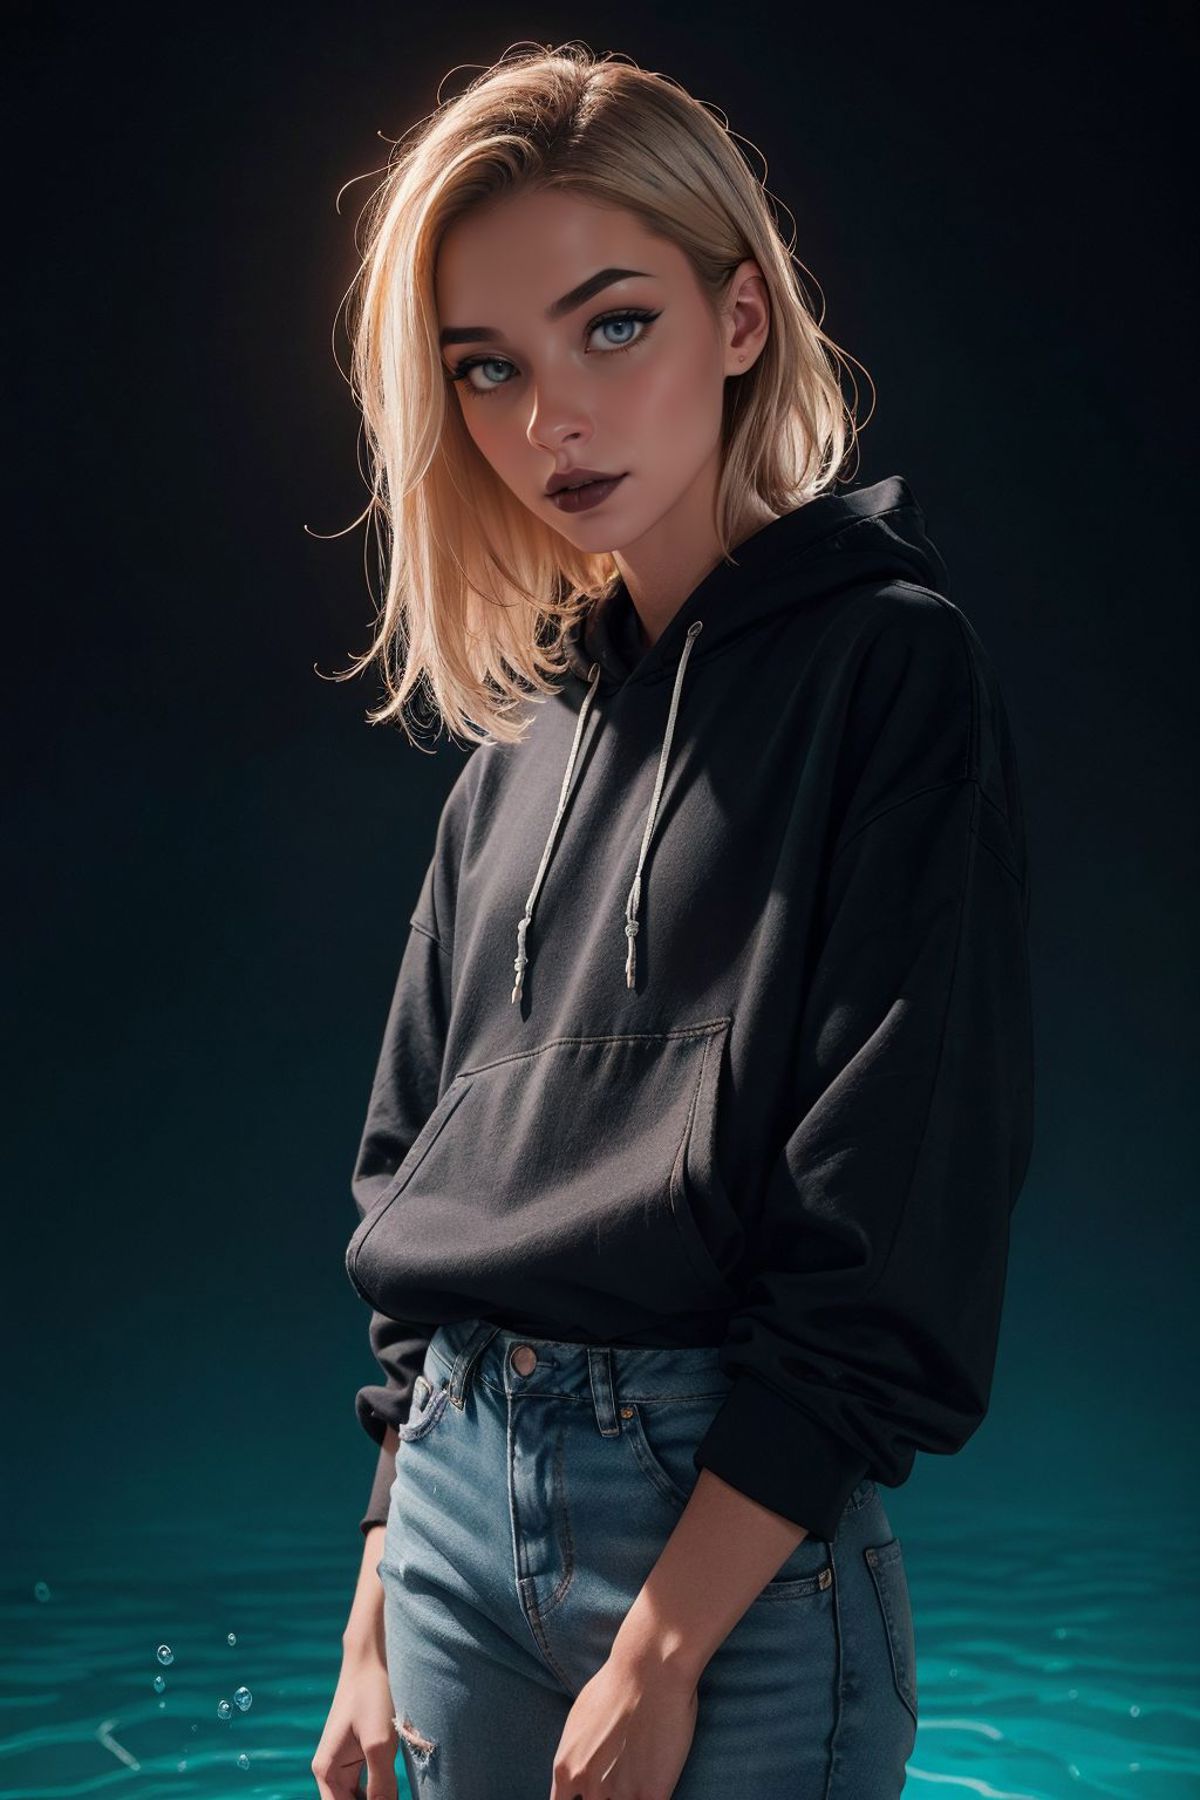 A woman wearing a black sweatshirt and jeans poses for the camera.